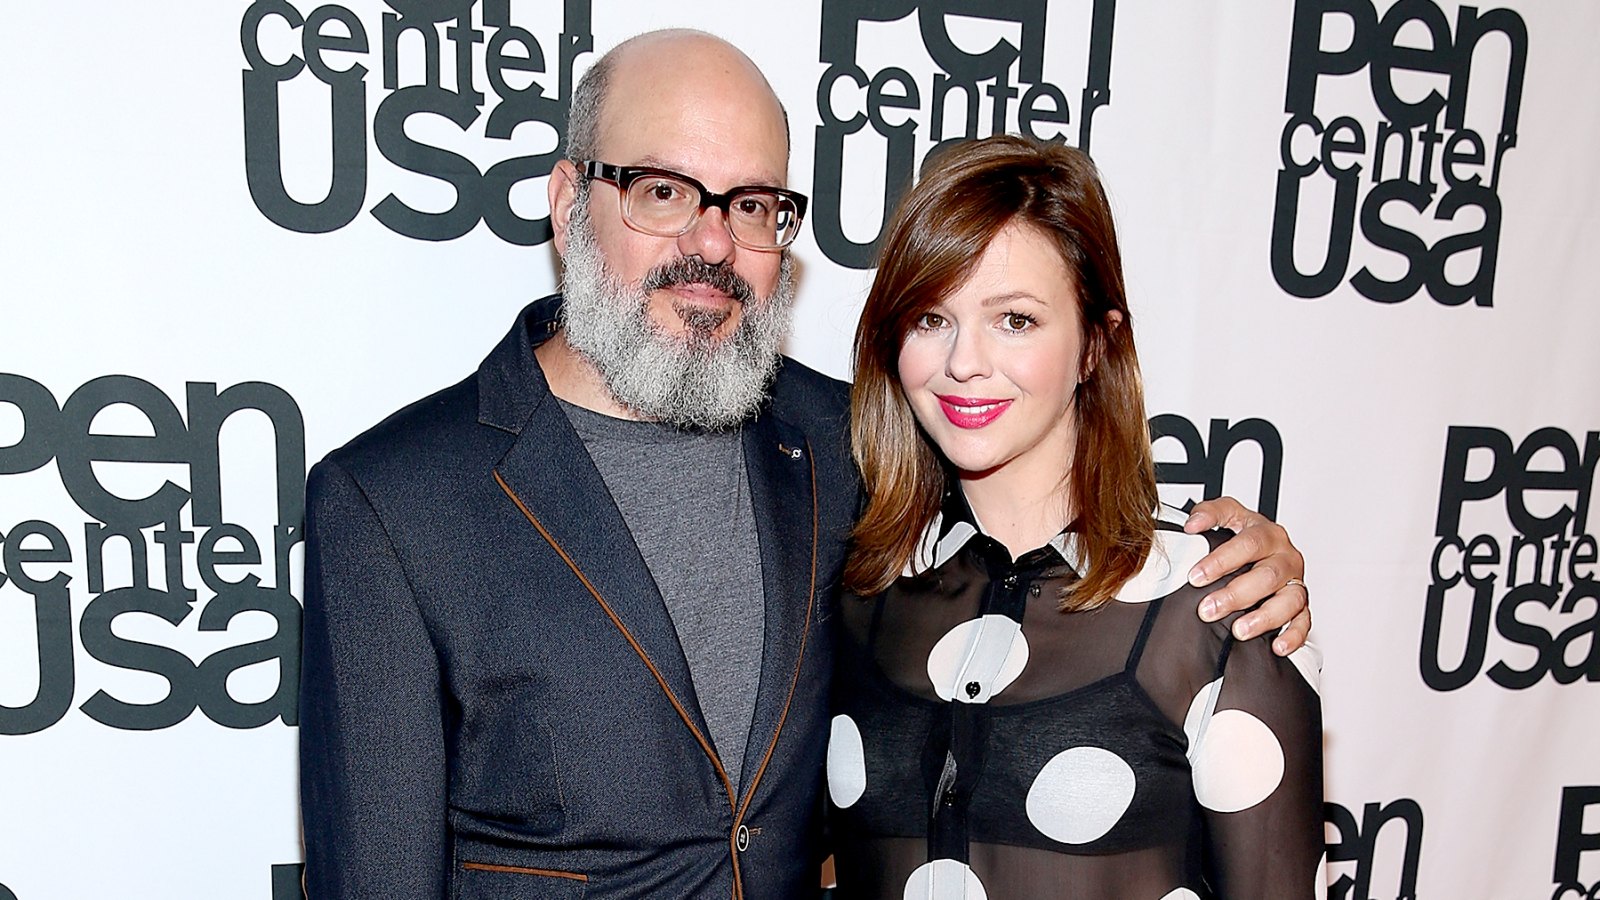 David Cross and Amber Tamblyn attend PEN Center USA's 26th Annual Literary Awards Festival honoring Isabel Allende at the Beverly Wilshire Four Seasons Hotel on September 28, 2016 in Beverly Hills, California.